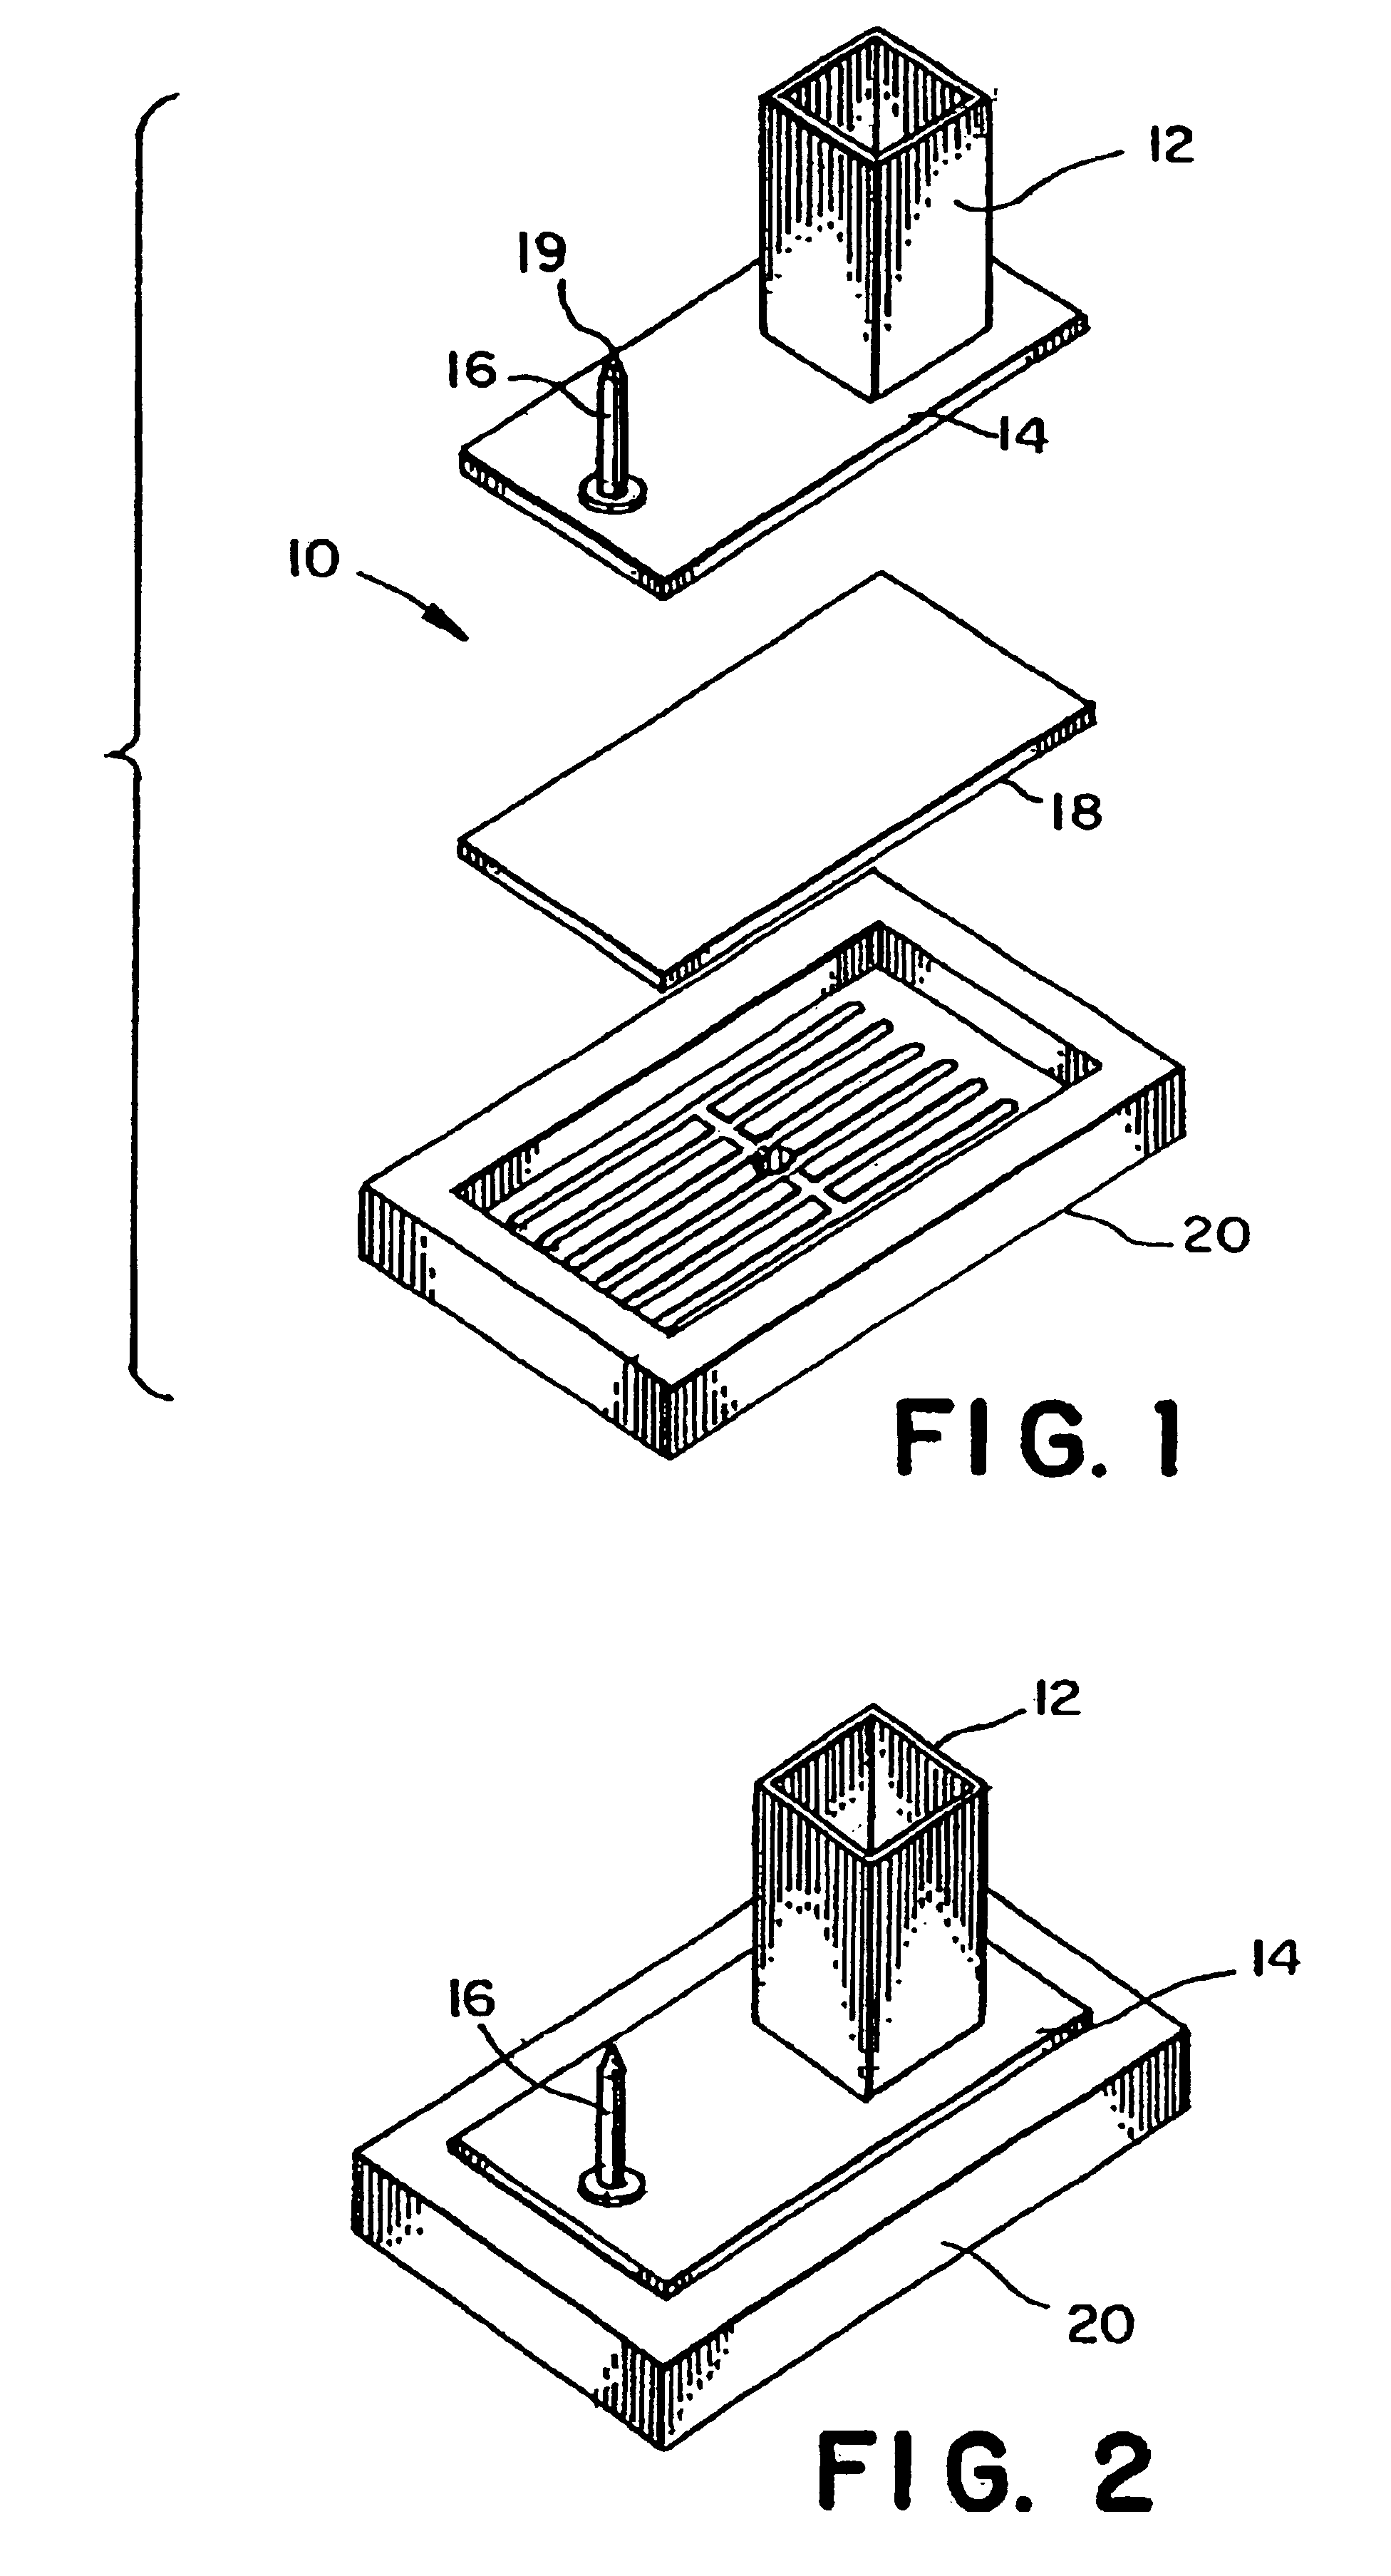 Method and apparatus for directly sampling a fluid for microfiltration